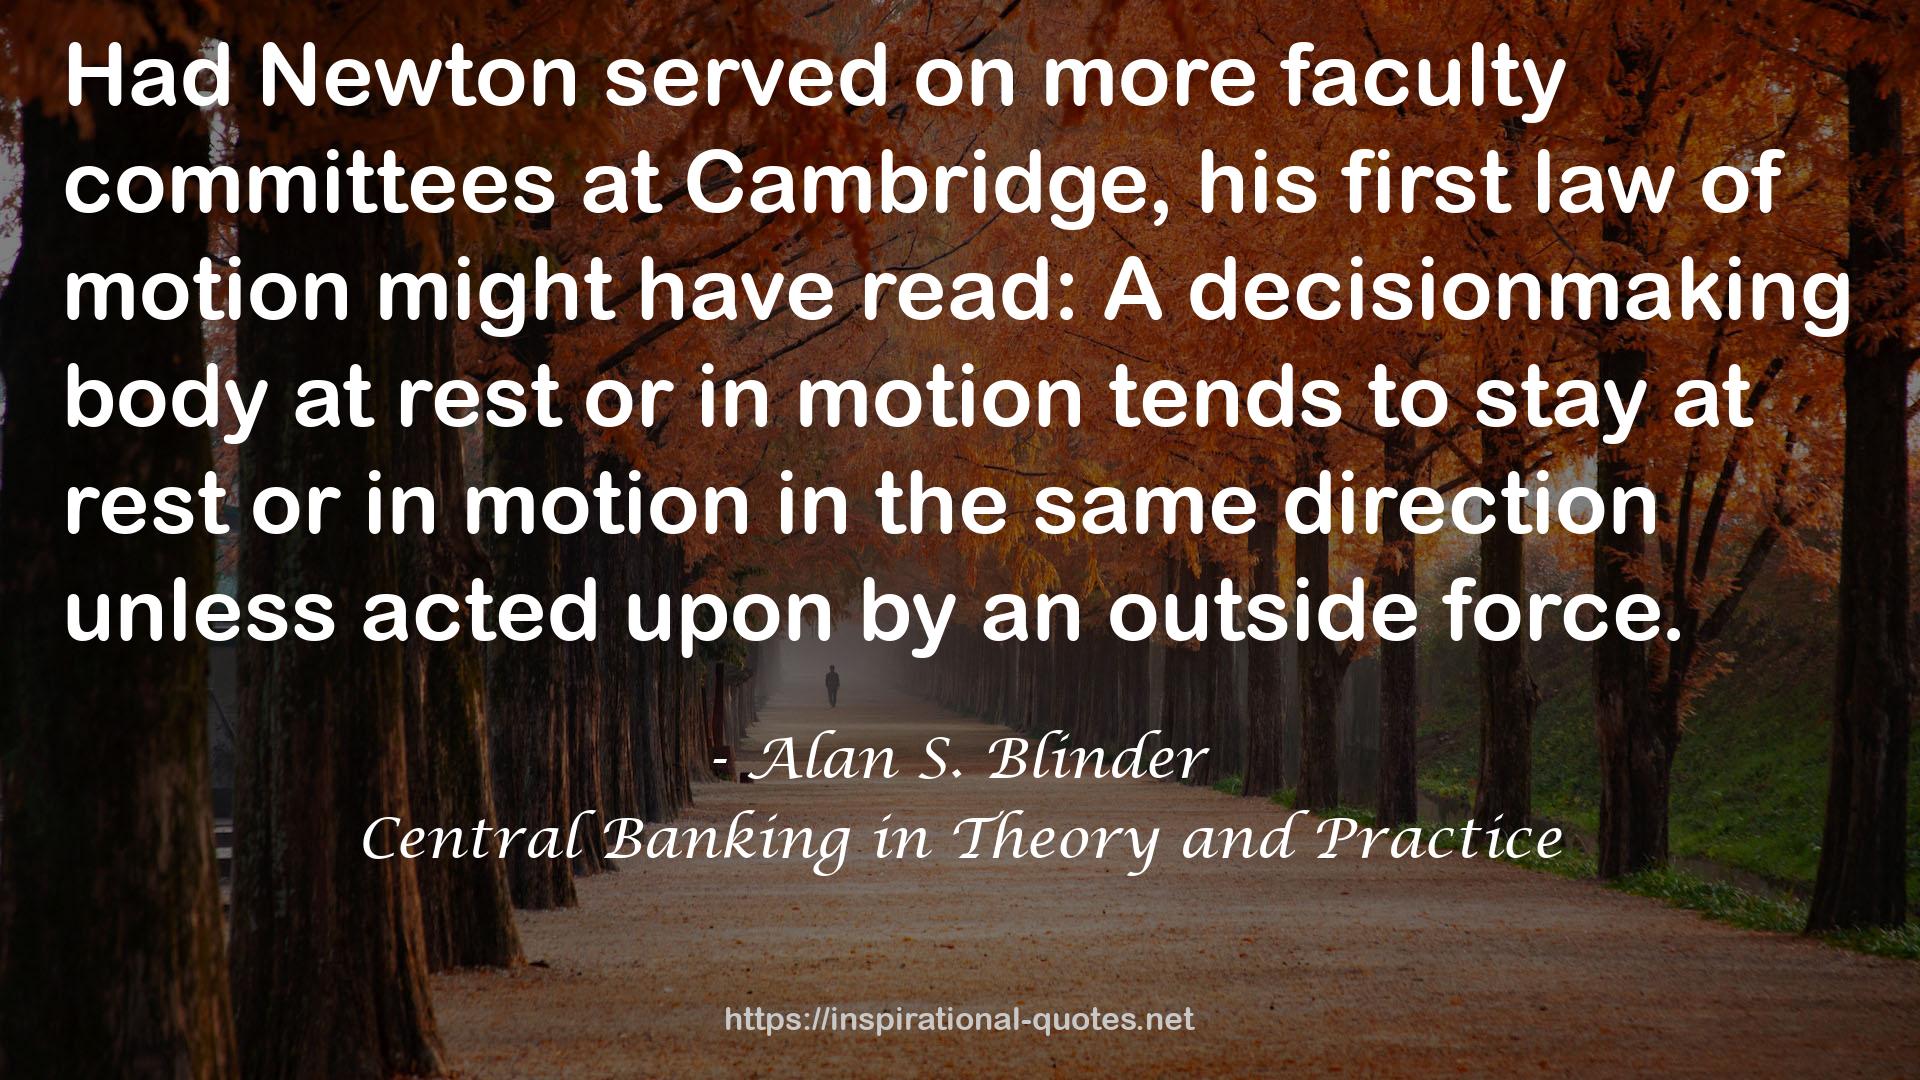 Central Banking in Theory and Practice QUOTES